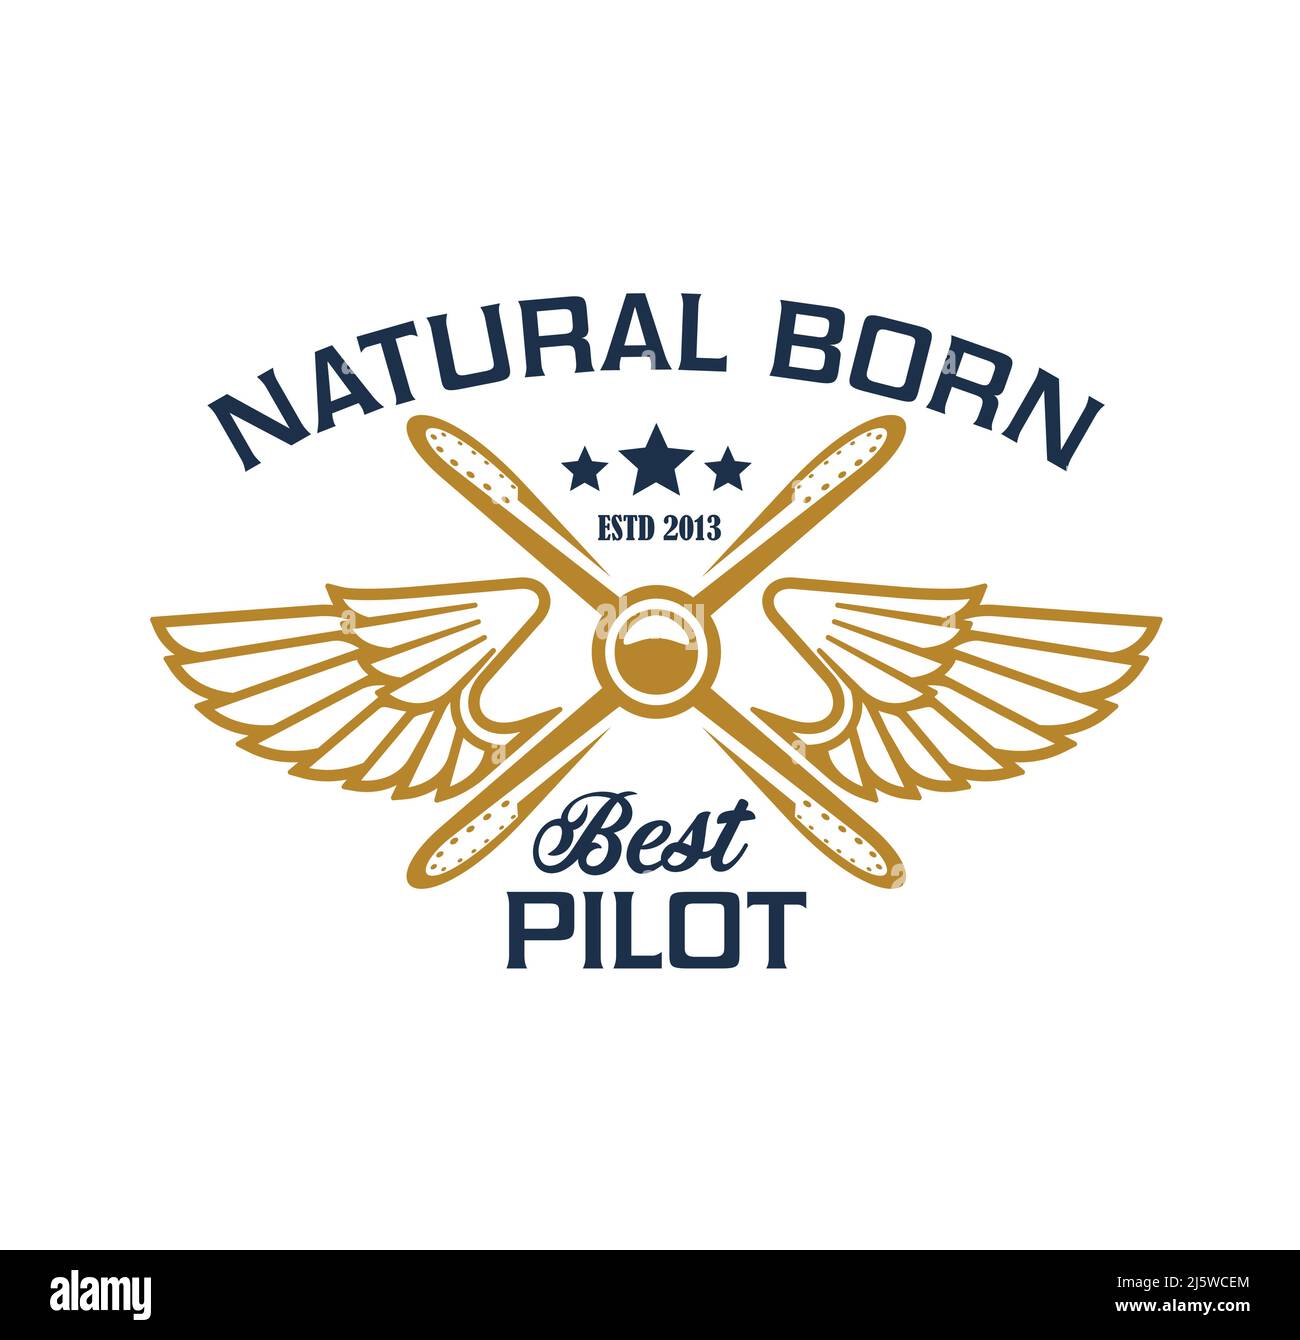 Airplane pilots crew icon, plane propeller and wings, vector aviation emblem. Pilot or aviator academy team badge with retro propeller airplane and natural born best pilot slogan with premium stars Stock Vector